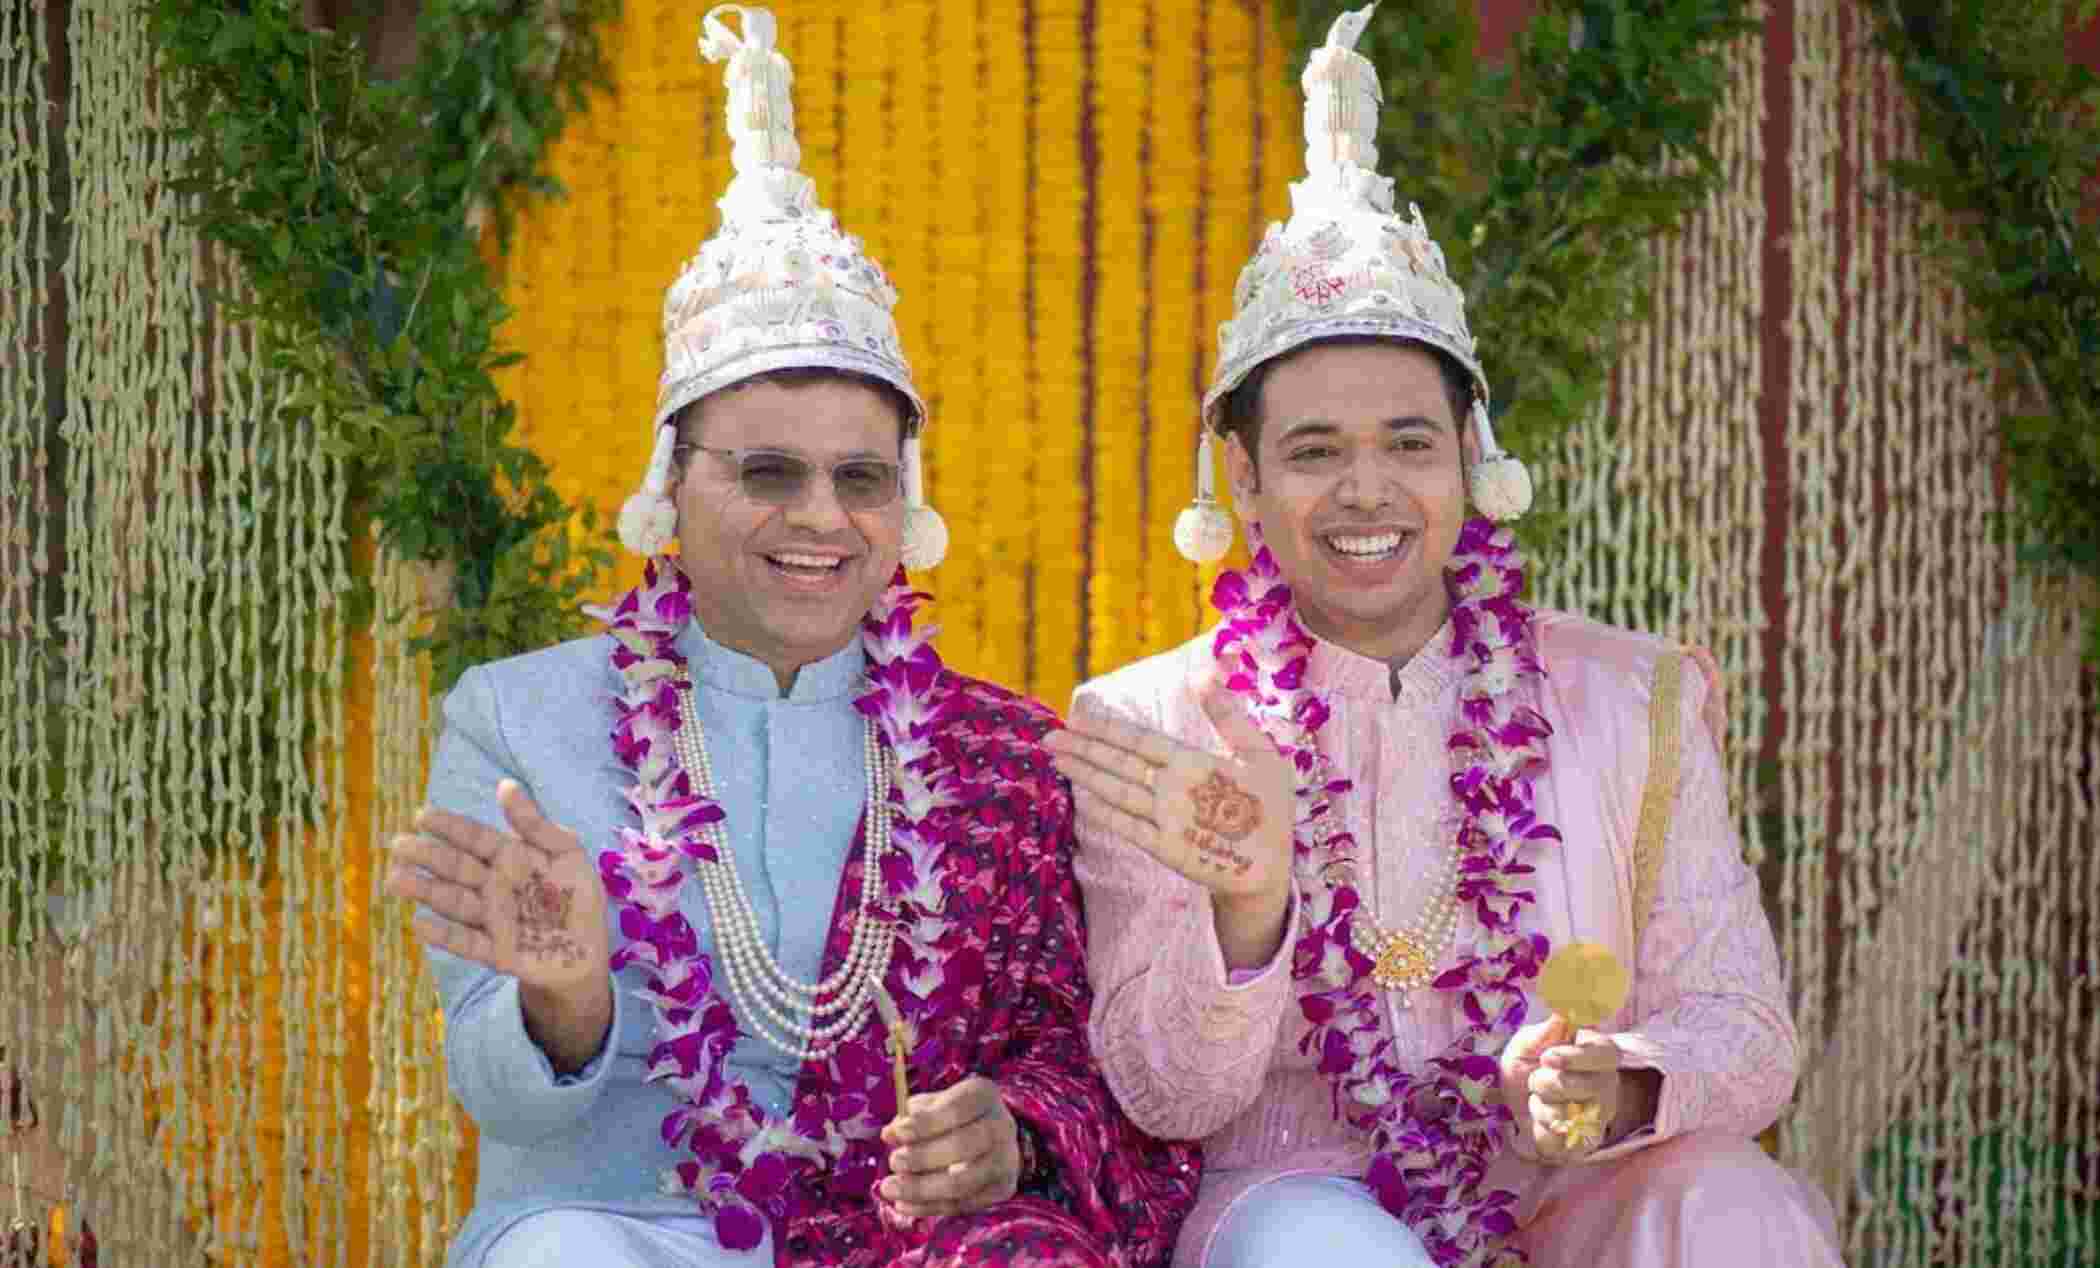 Telangana gay men enter into wedlock, say it has sent out a message